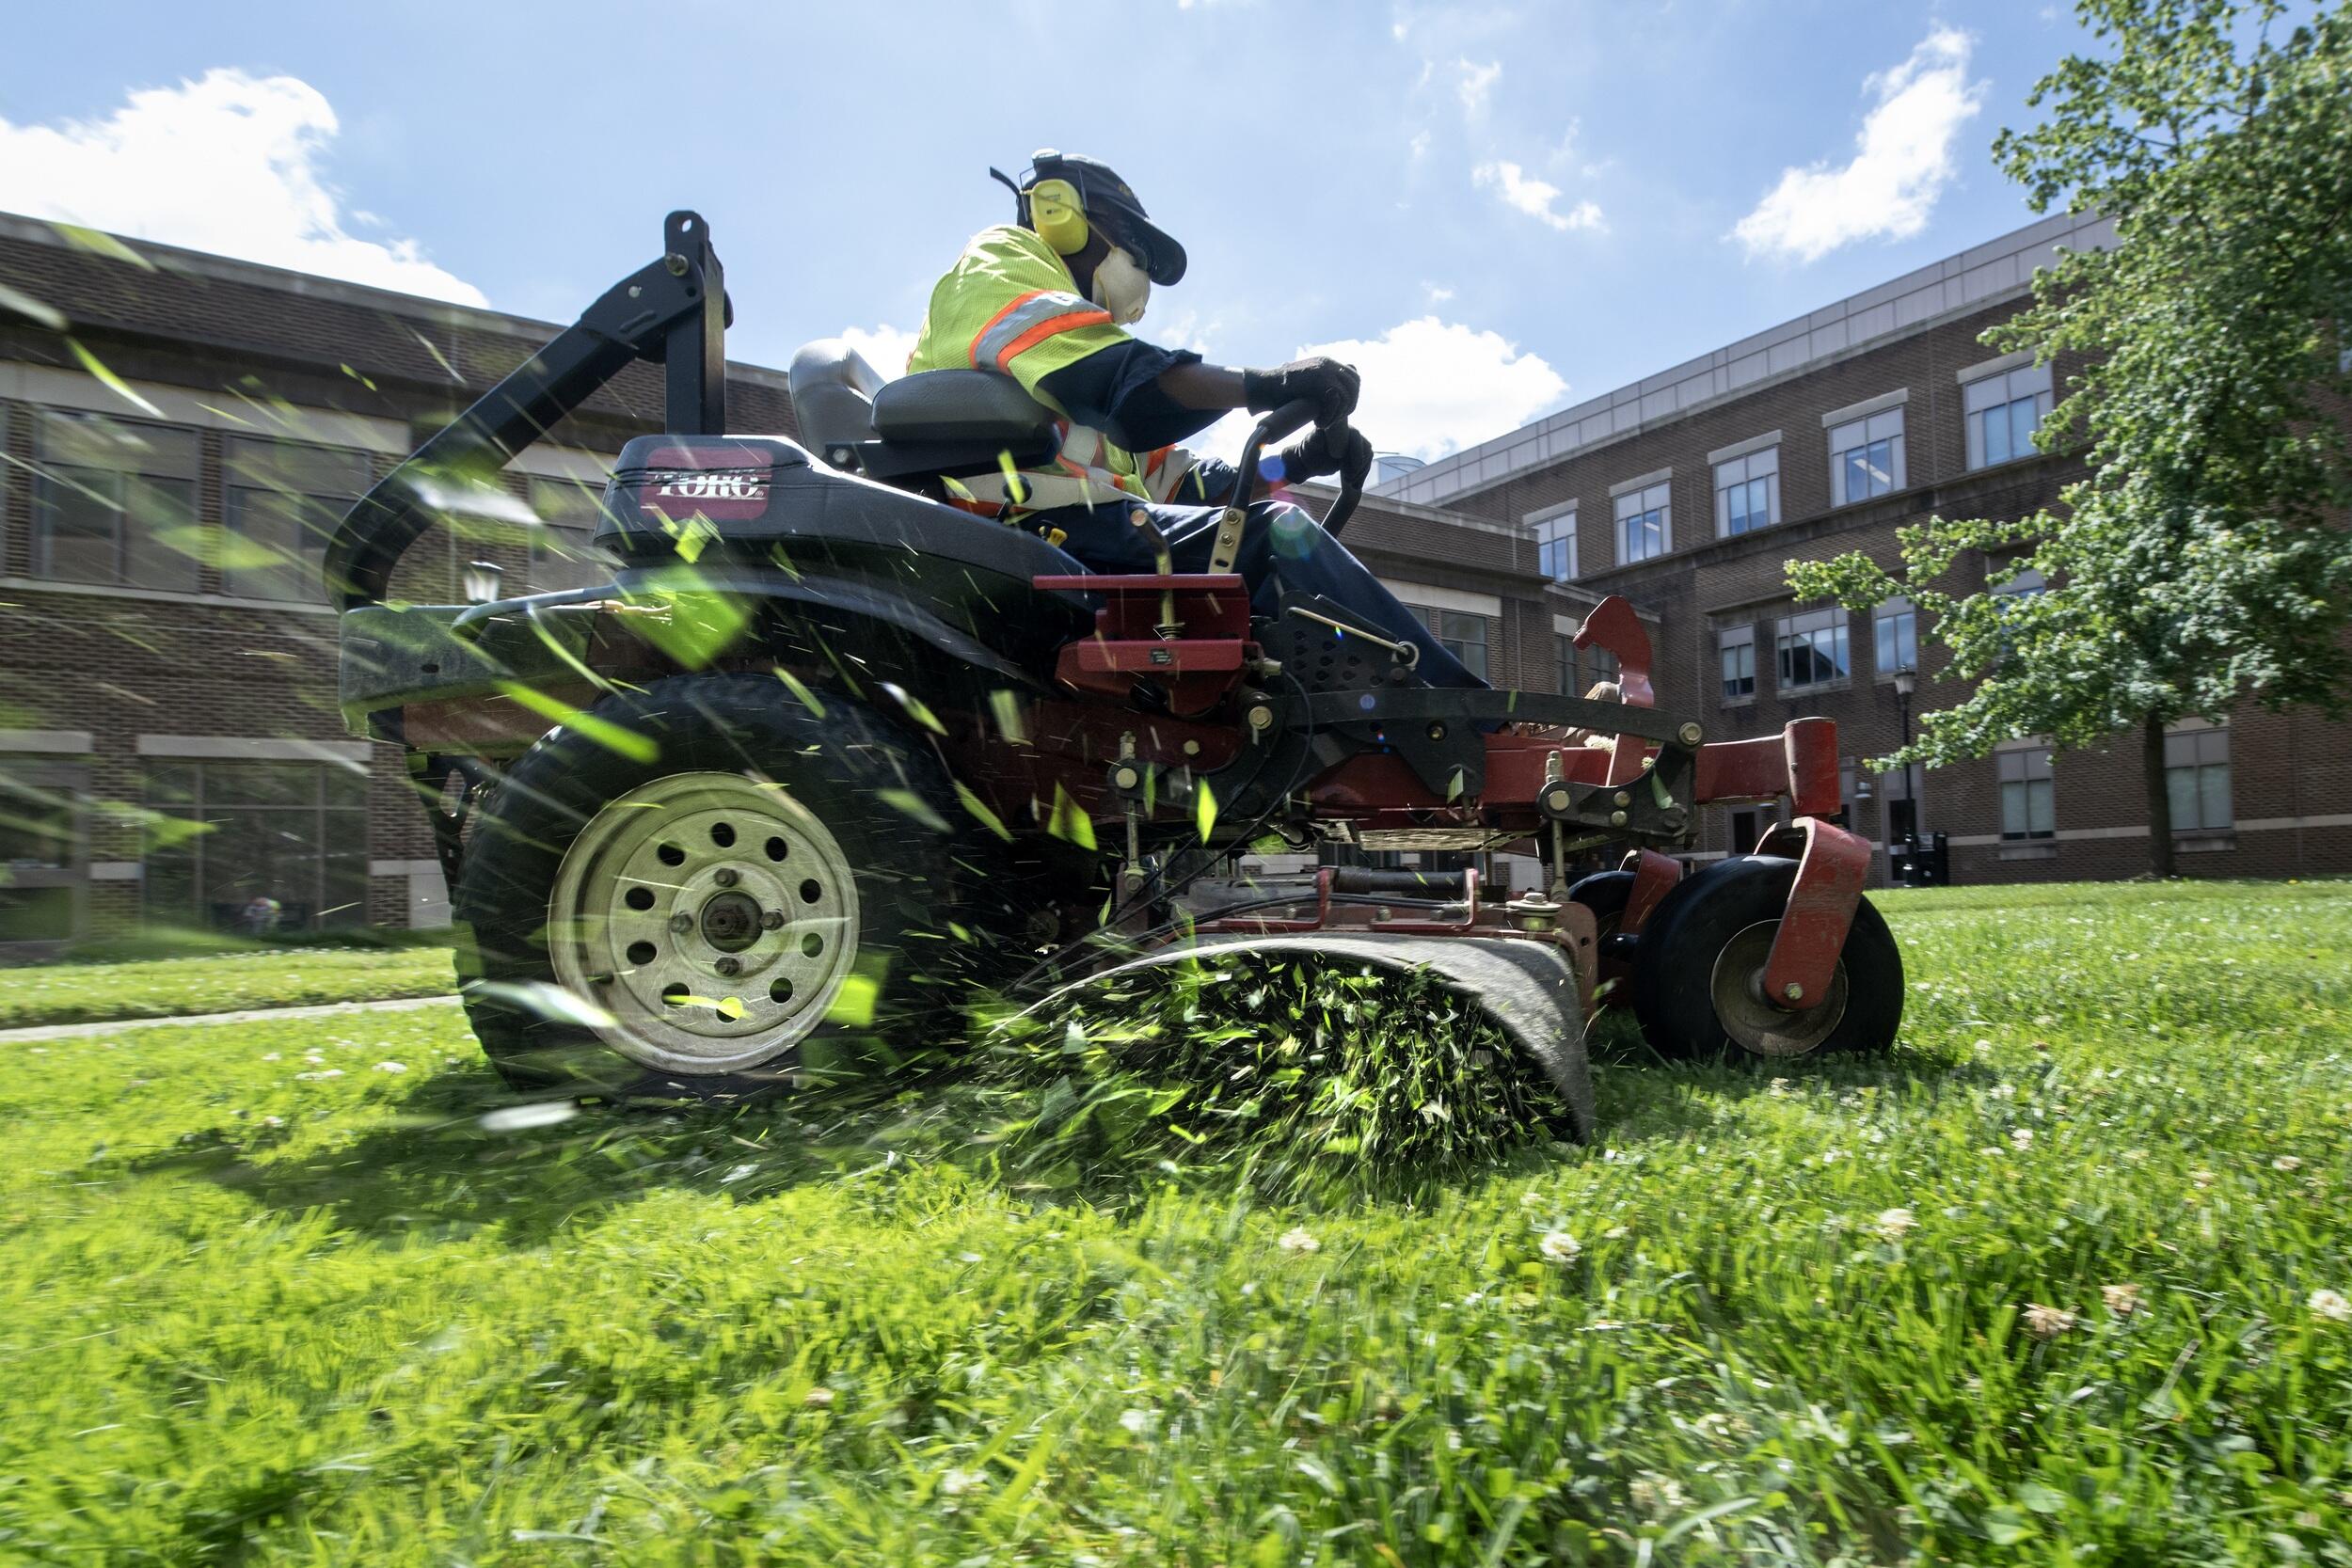 A photo of a man cutting grass on a riding lawnmower. 